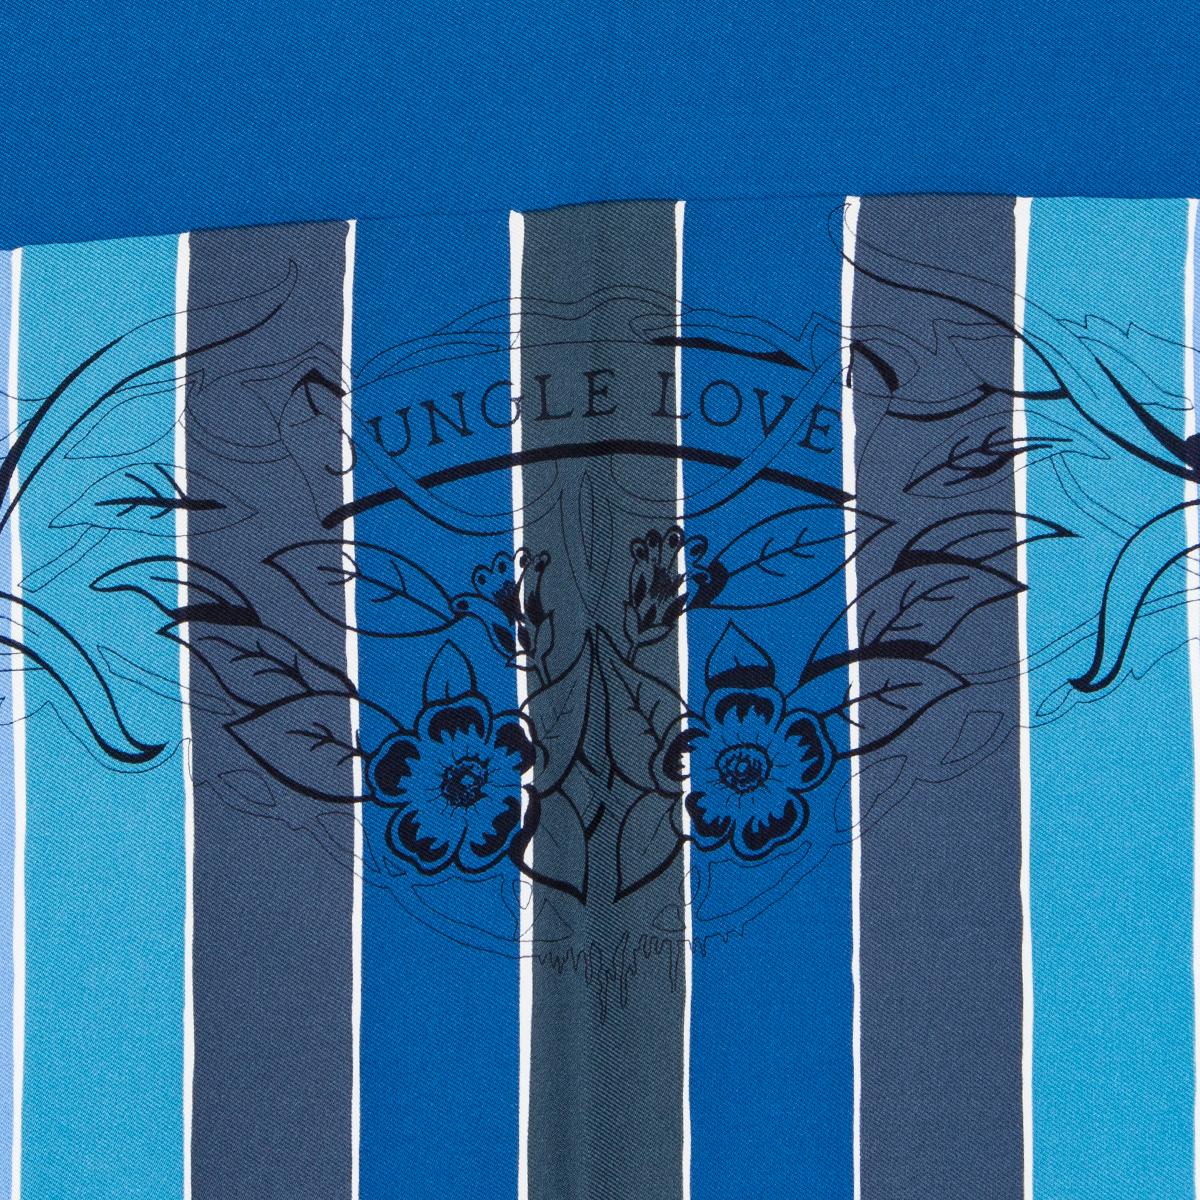 Hermes 'Jungles Love Rainbow 90' scarf by Robert Dallet in blue silk twill (100%) with contrasting light blue hem and details in every shade of blue and black. Brand new with tag.

Width 90cm (35.1in)
Height 90cm (35.1in)